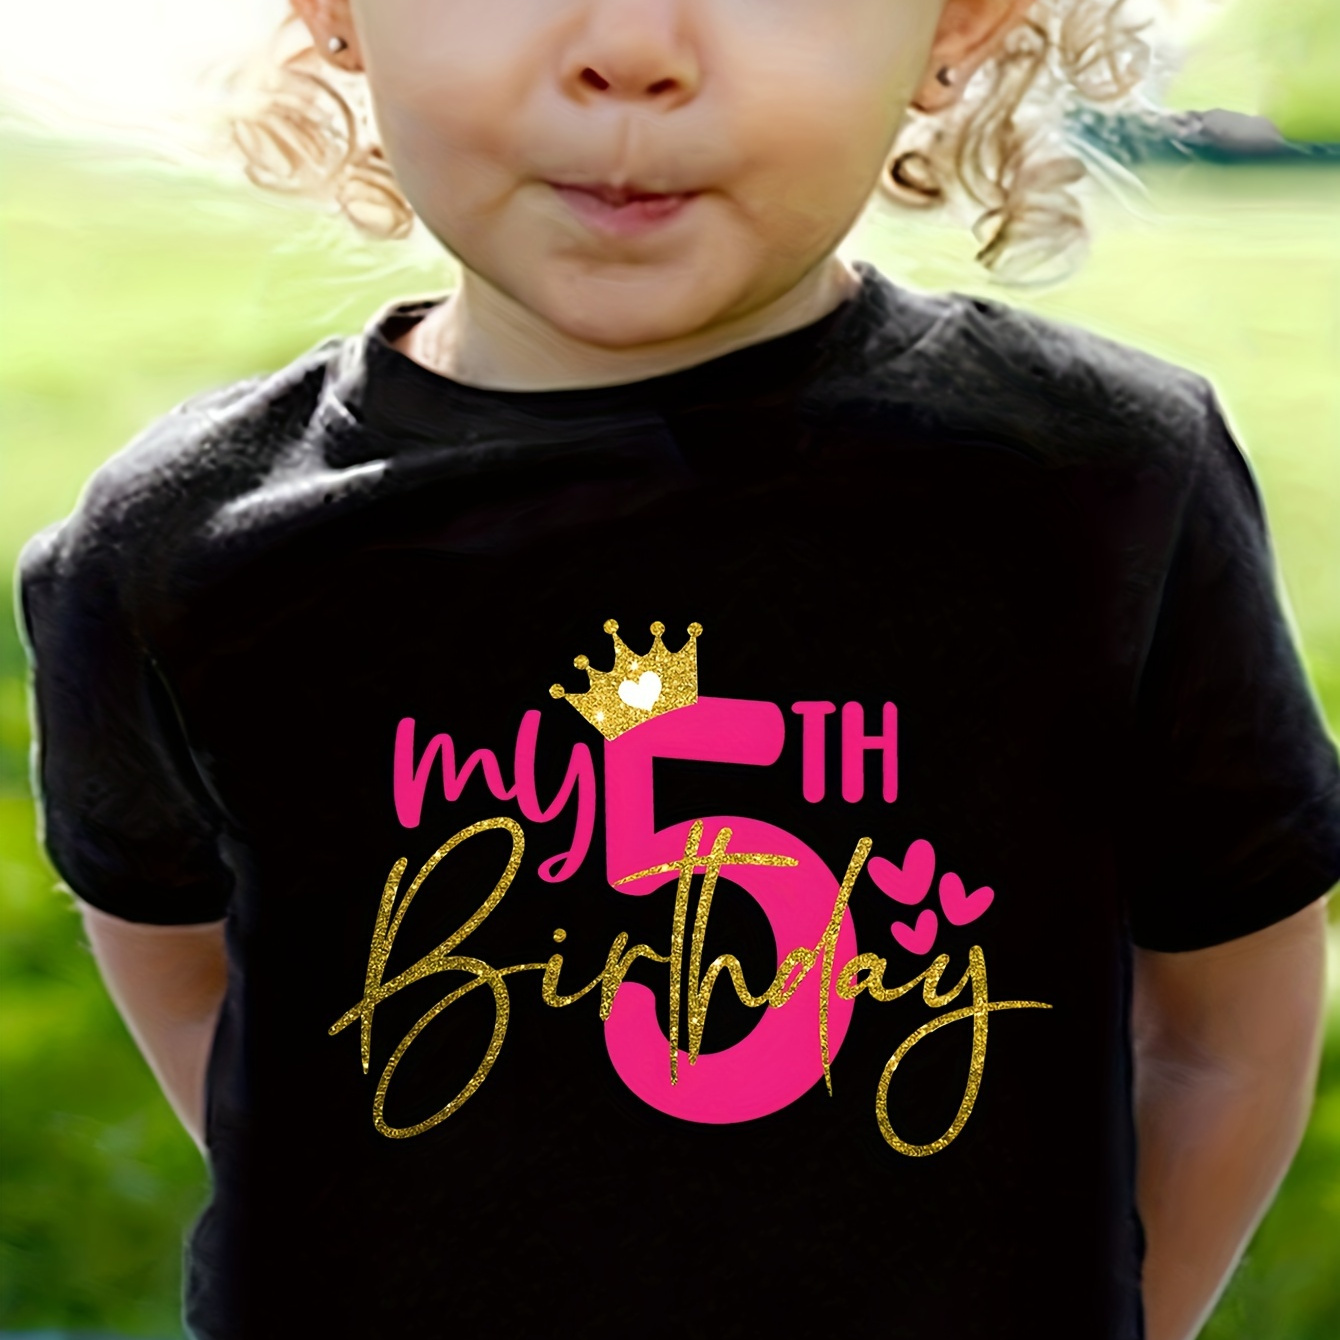 

Graffiti My 5th Birthday With Crown Graphic Print, Girls' Casual & Comfy Crew Neck Short Sleeve T-shirt For Spring & Summer, Girls' Clothes For Outdoor Activities